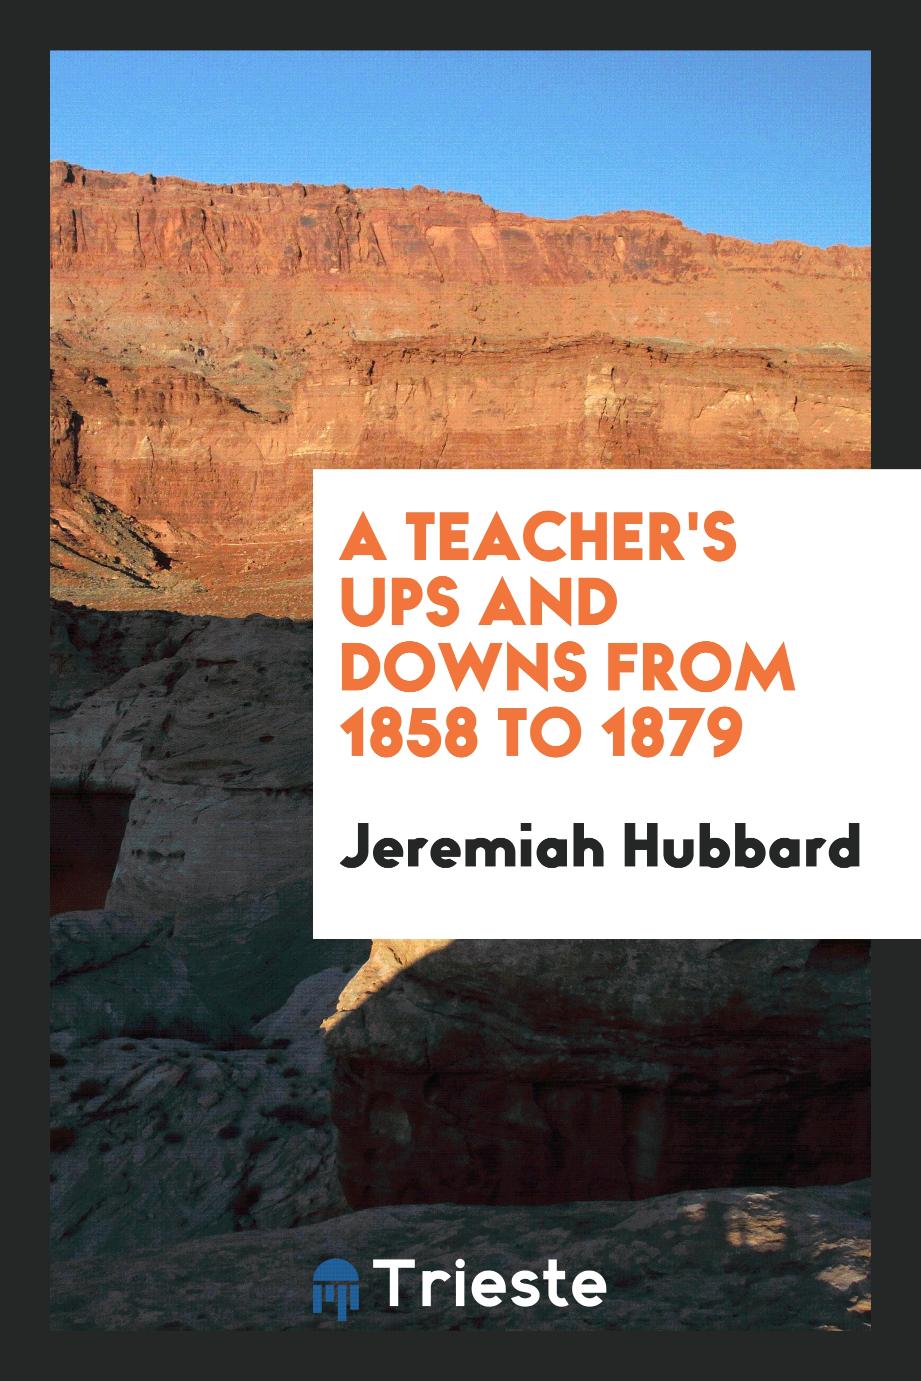 A Teacher's Ups and Downs from 1858 to 1879